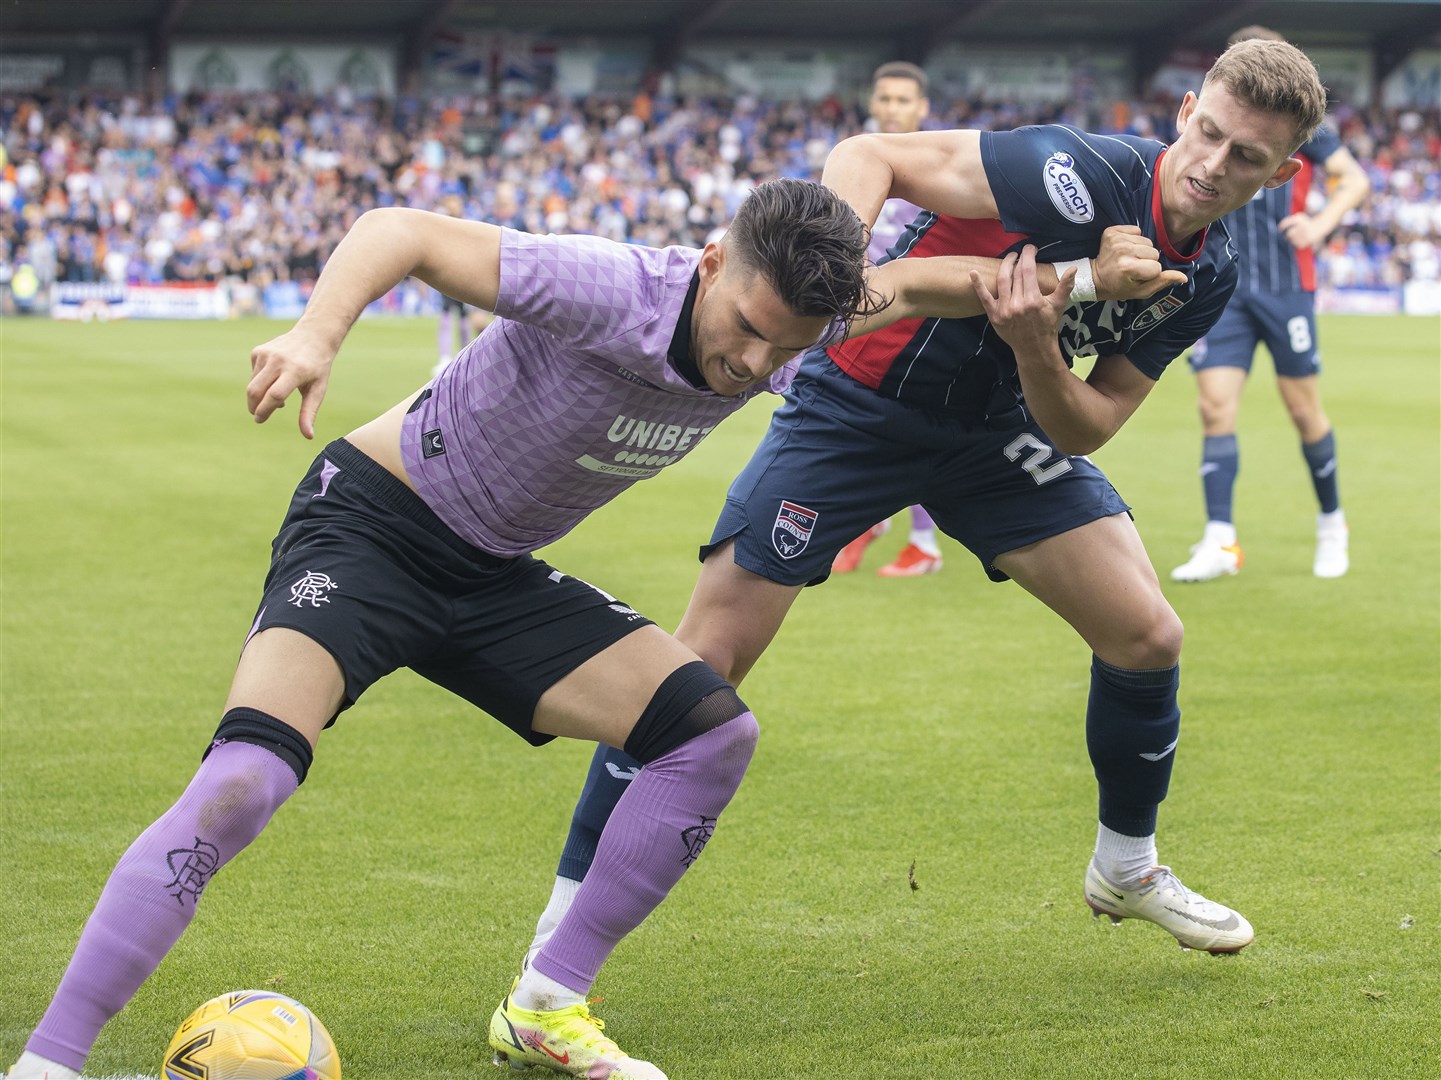 Picture - Ken Macpherson, Inverness. Ross County(2) v Rangers(4). 22.08.21. Ross County's Ben Paton in an early tussle for the ball with Rangers' Ianis Hagi.